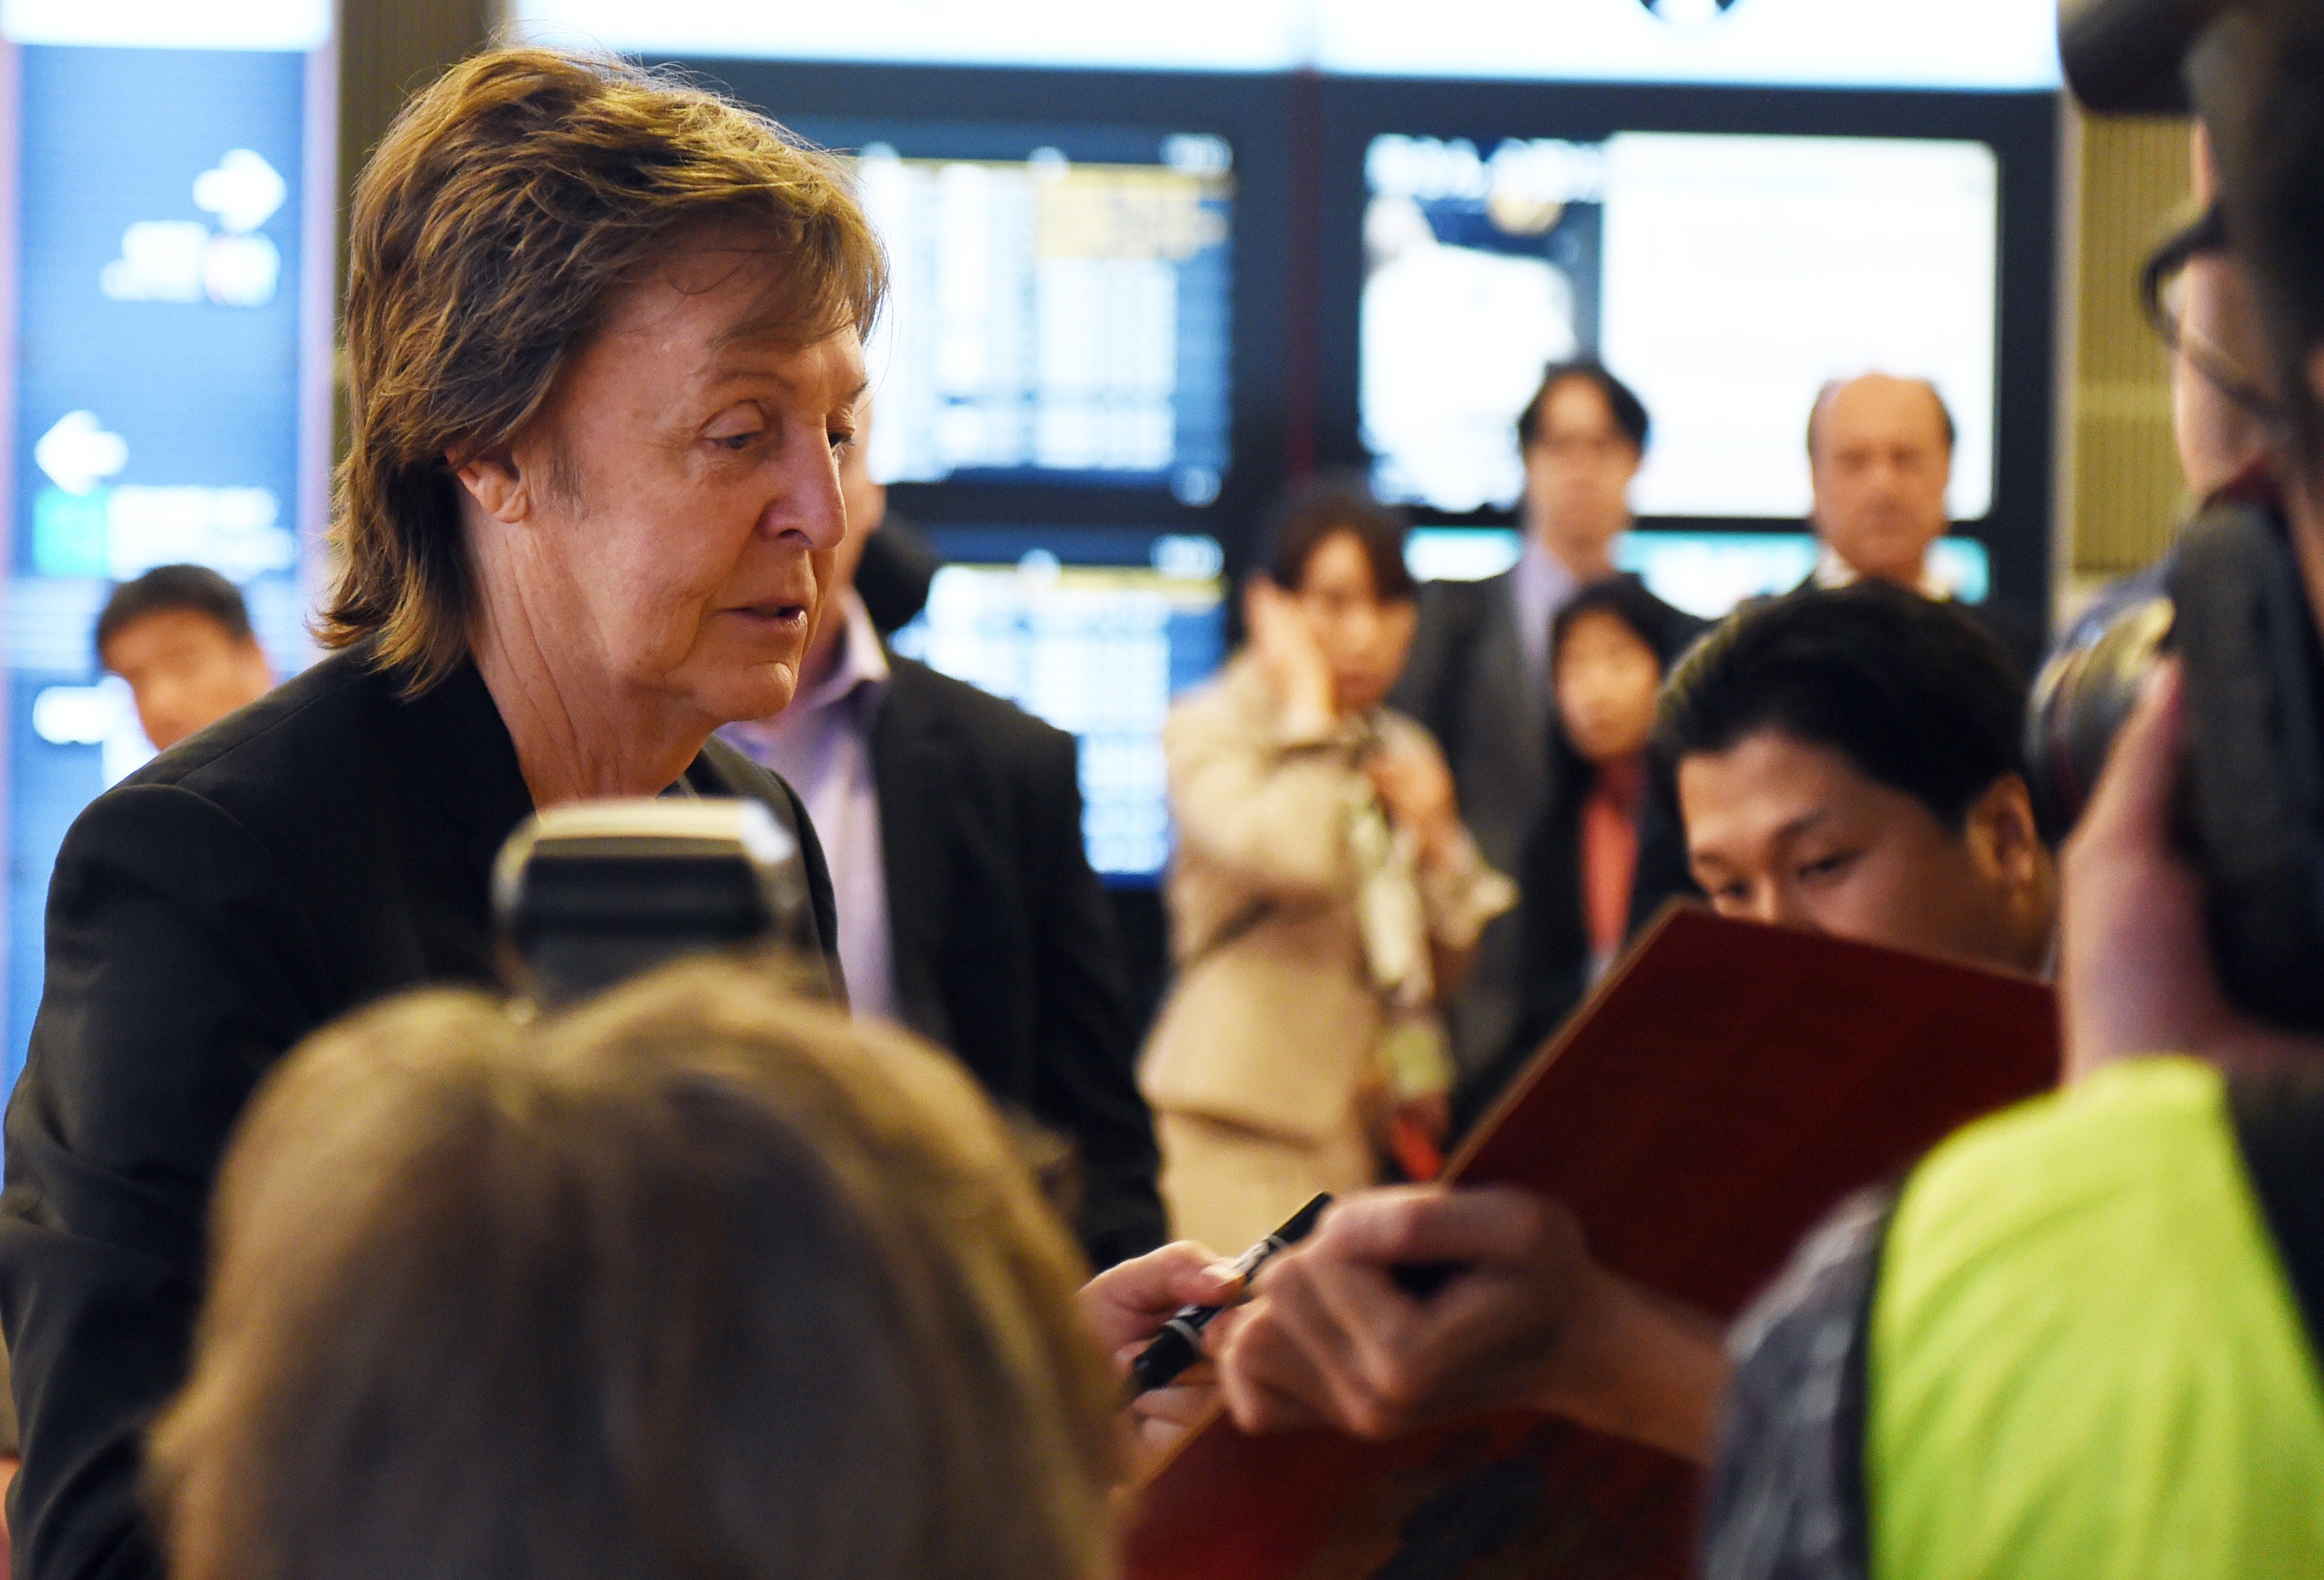 Paul McCartney signs his autograph to fans upon his arrival at the Haneda airport in Tokyo on May 15, 2014. | Source: Getty Images